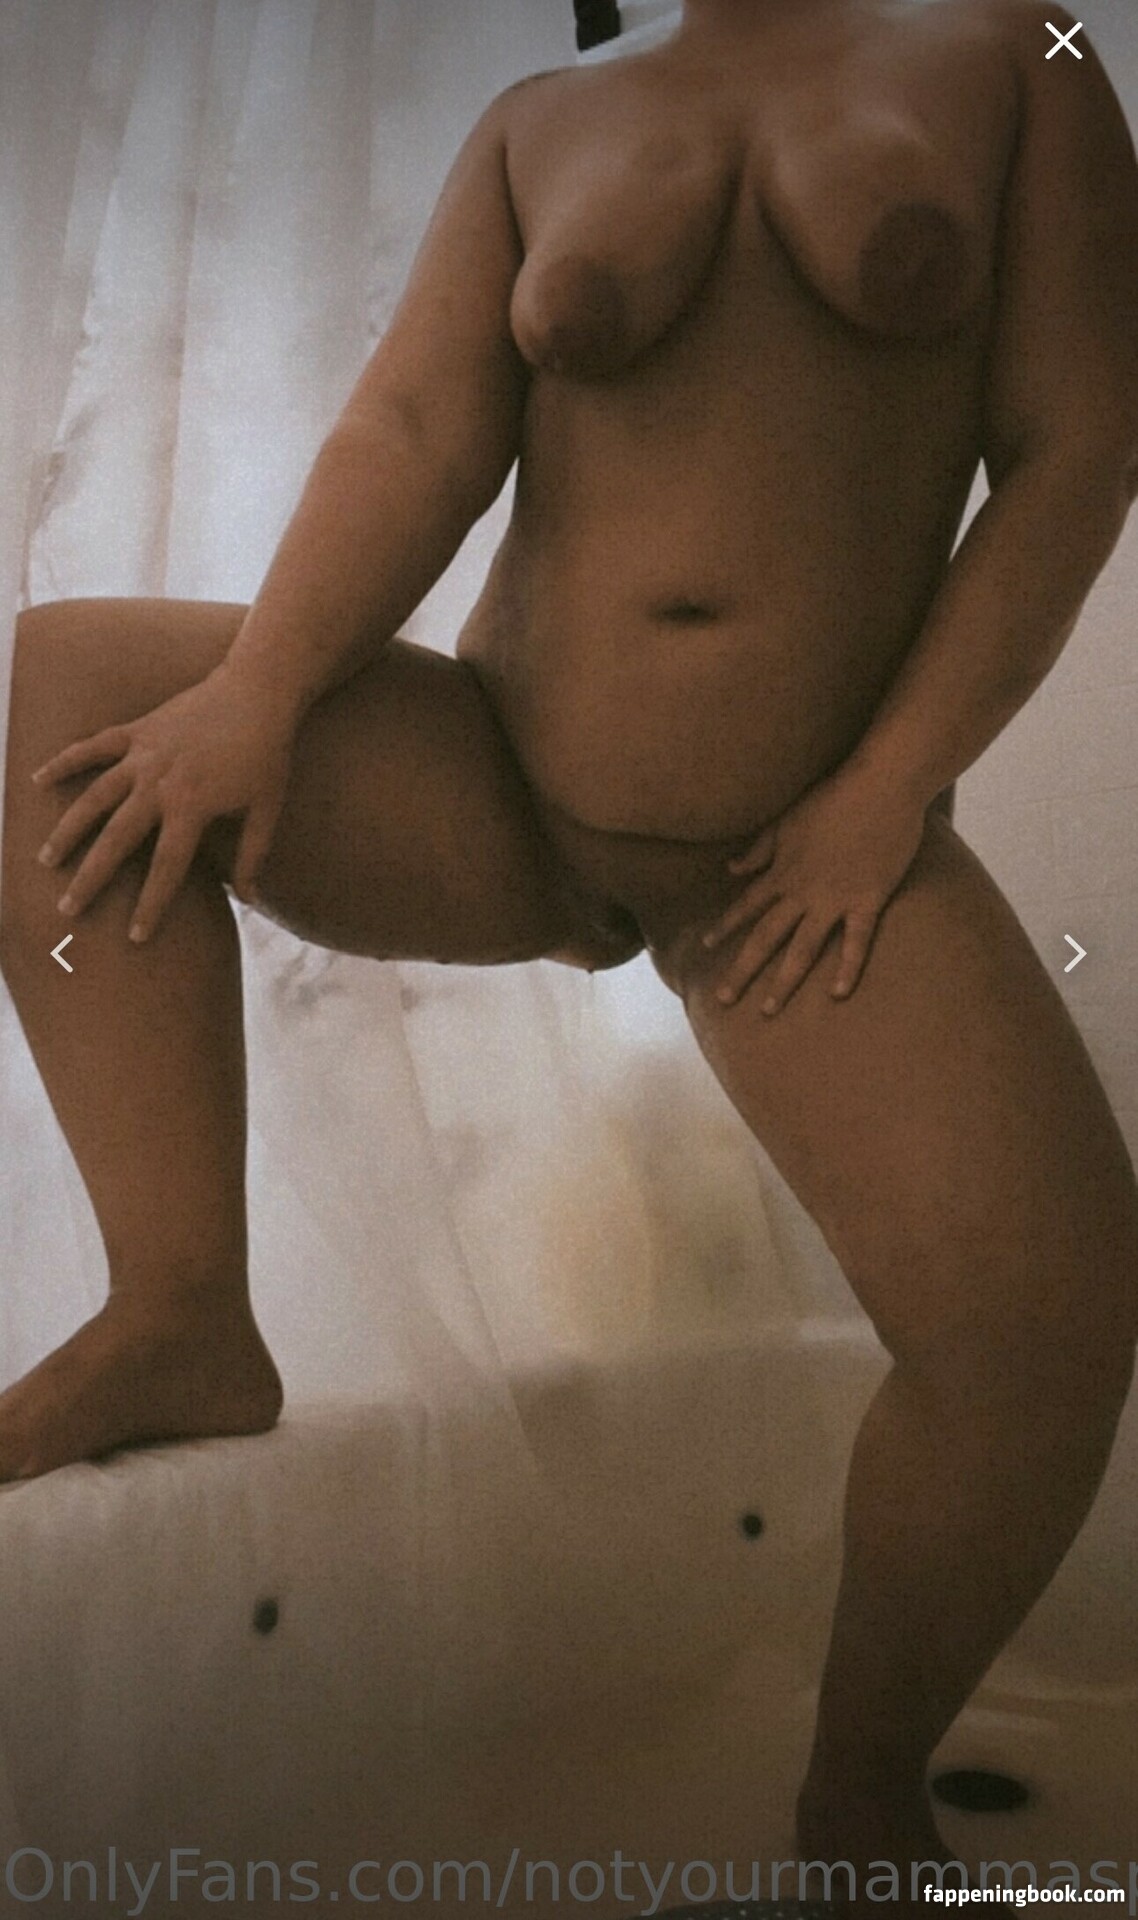 Officiallymomingyou nude